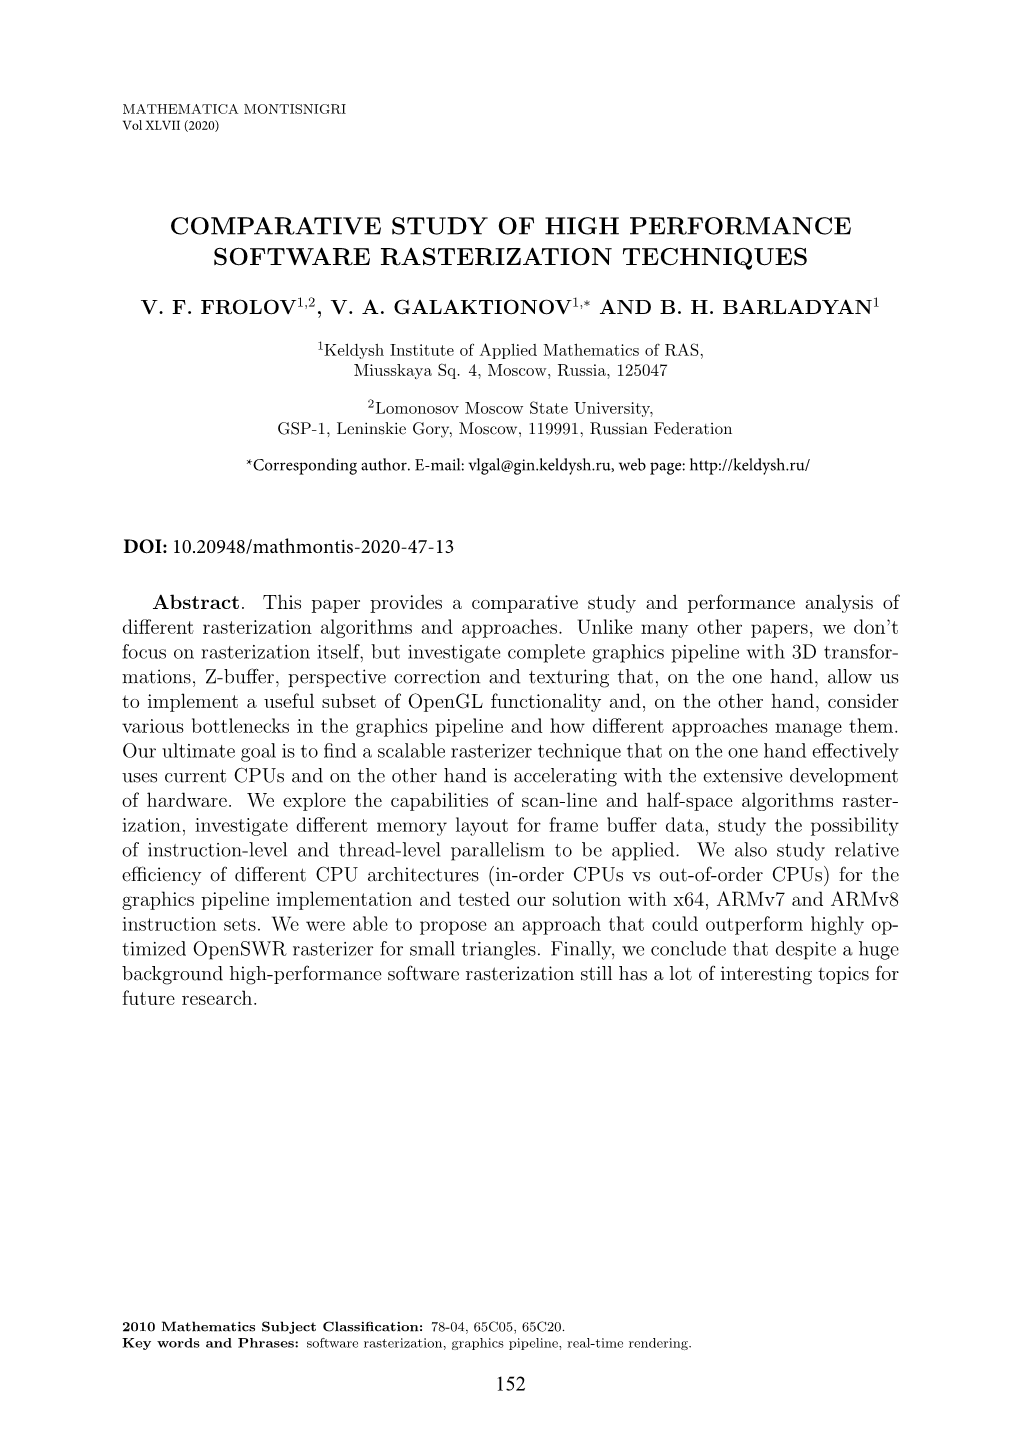 Comparative Study of High Performance Software Rasterization Techniques